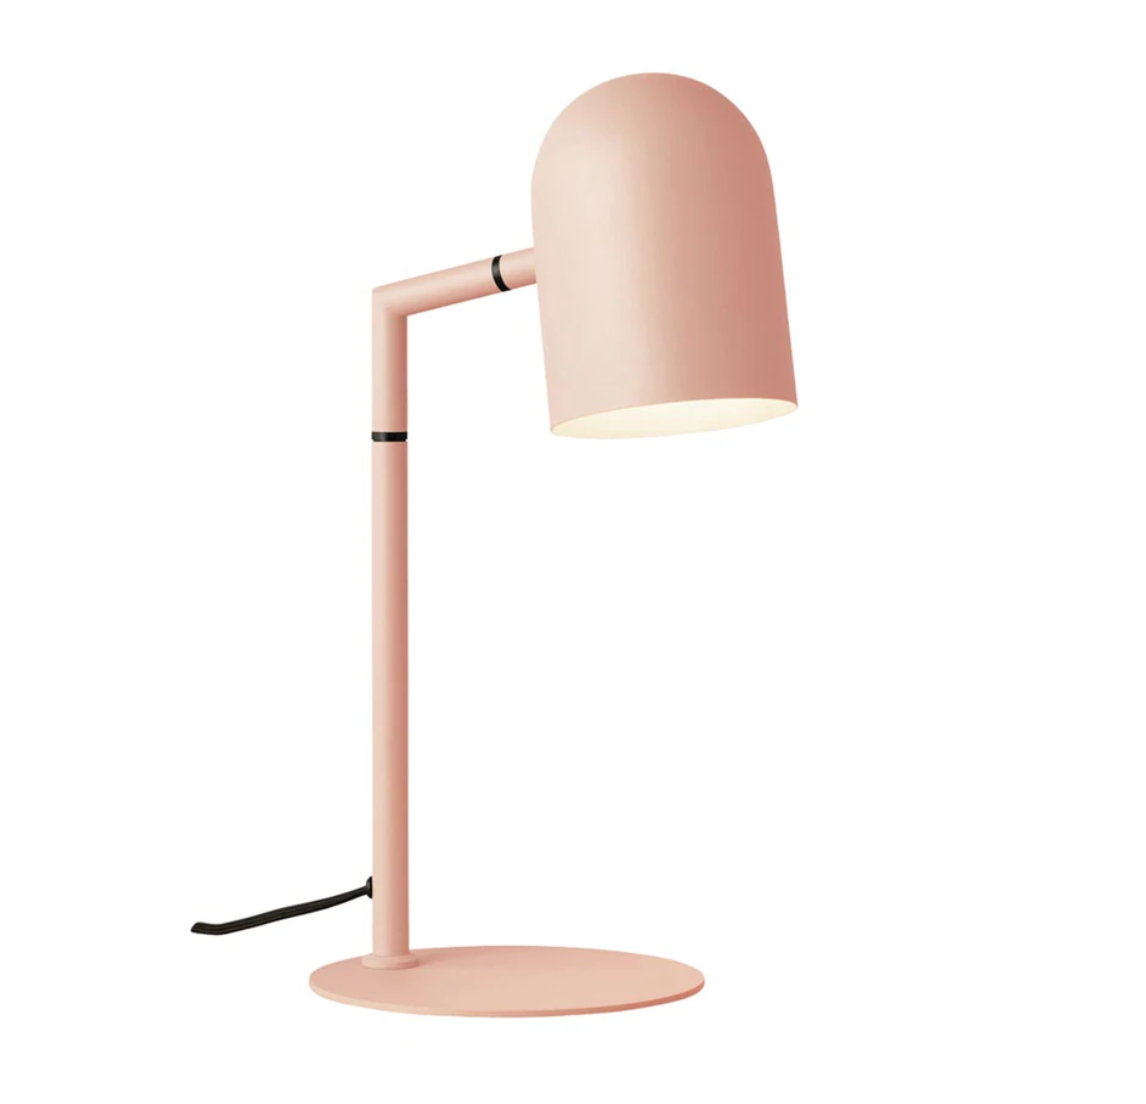 Purchased: Fenton and Fenton Pia Desk Lamp - Nude Pink